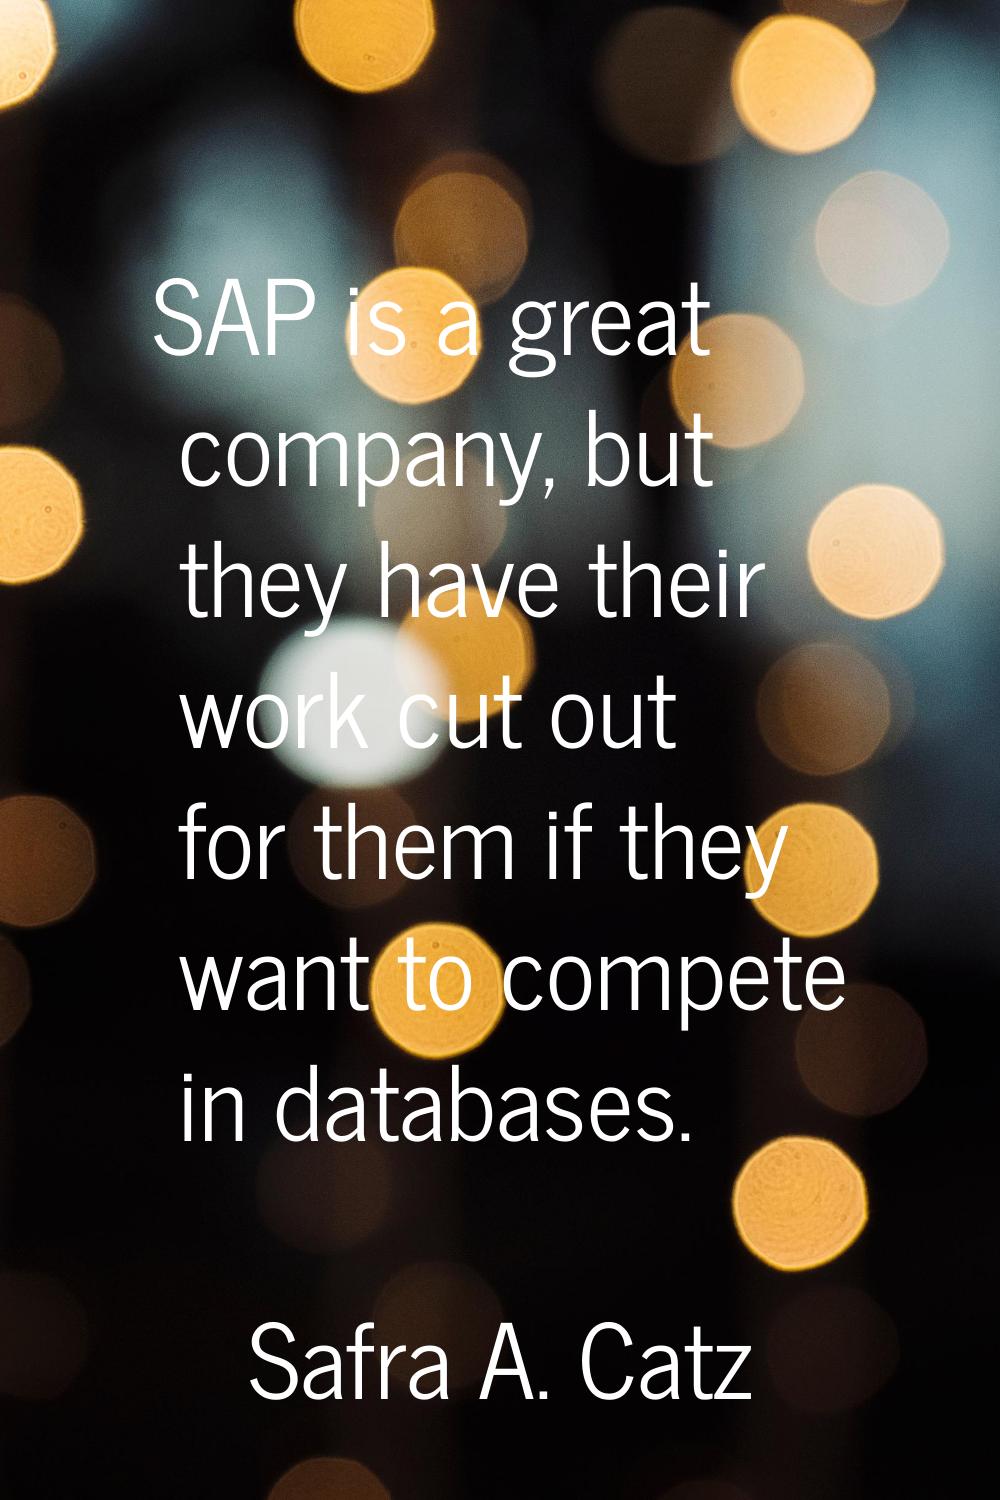 SAP is a great company, but they have their work cut out for them if they want to compete in databa